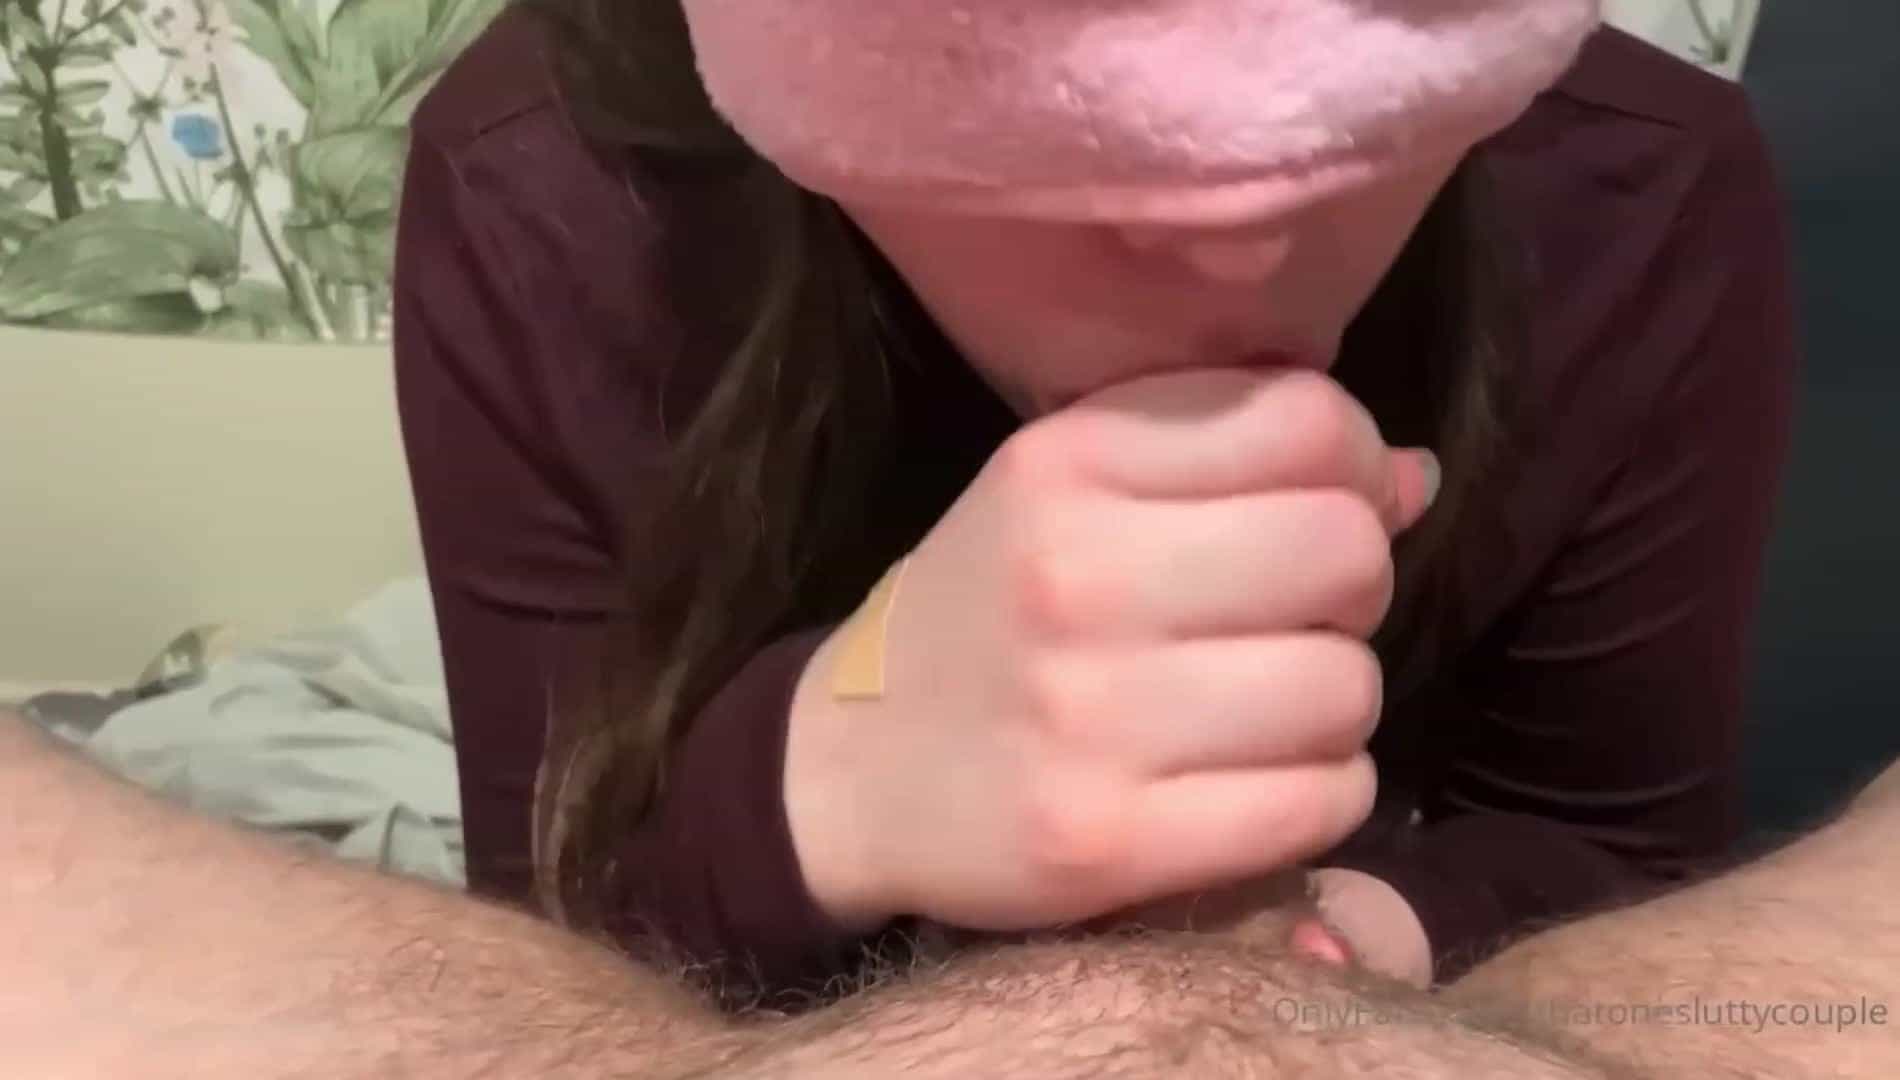 His cock started throbbing and I just kept sucking 